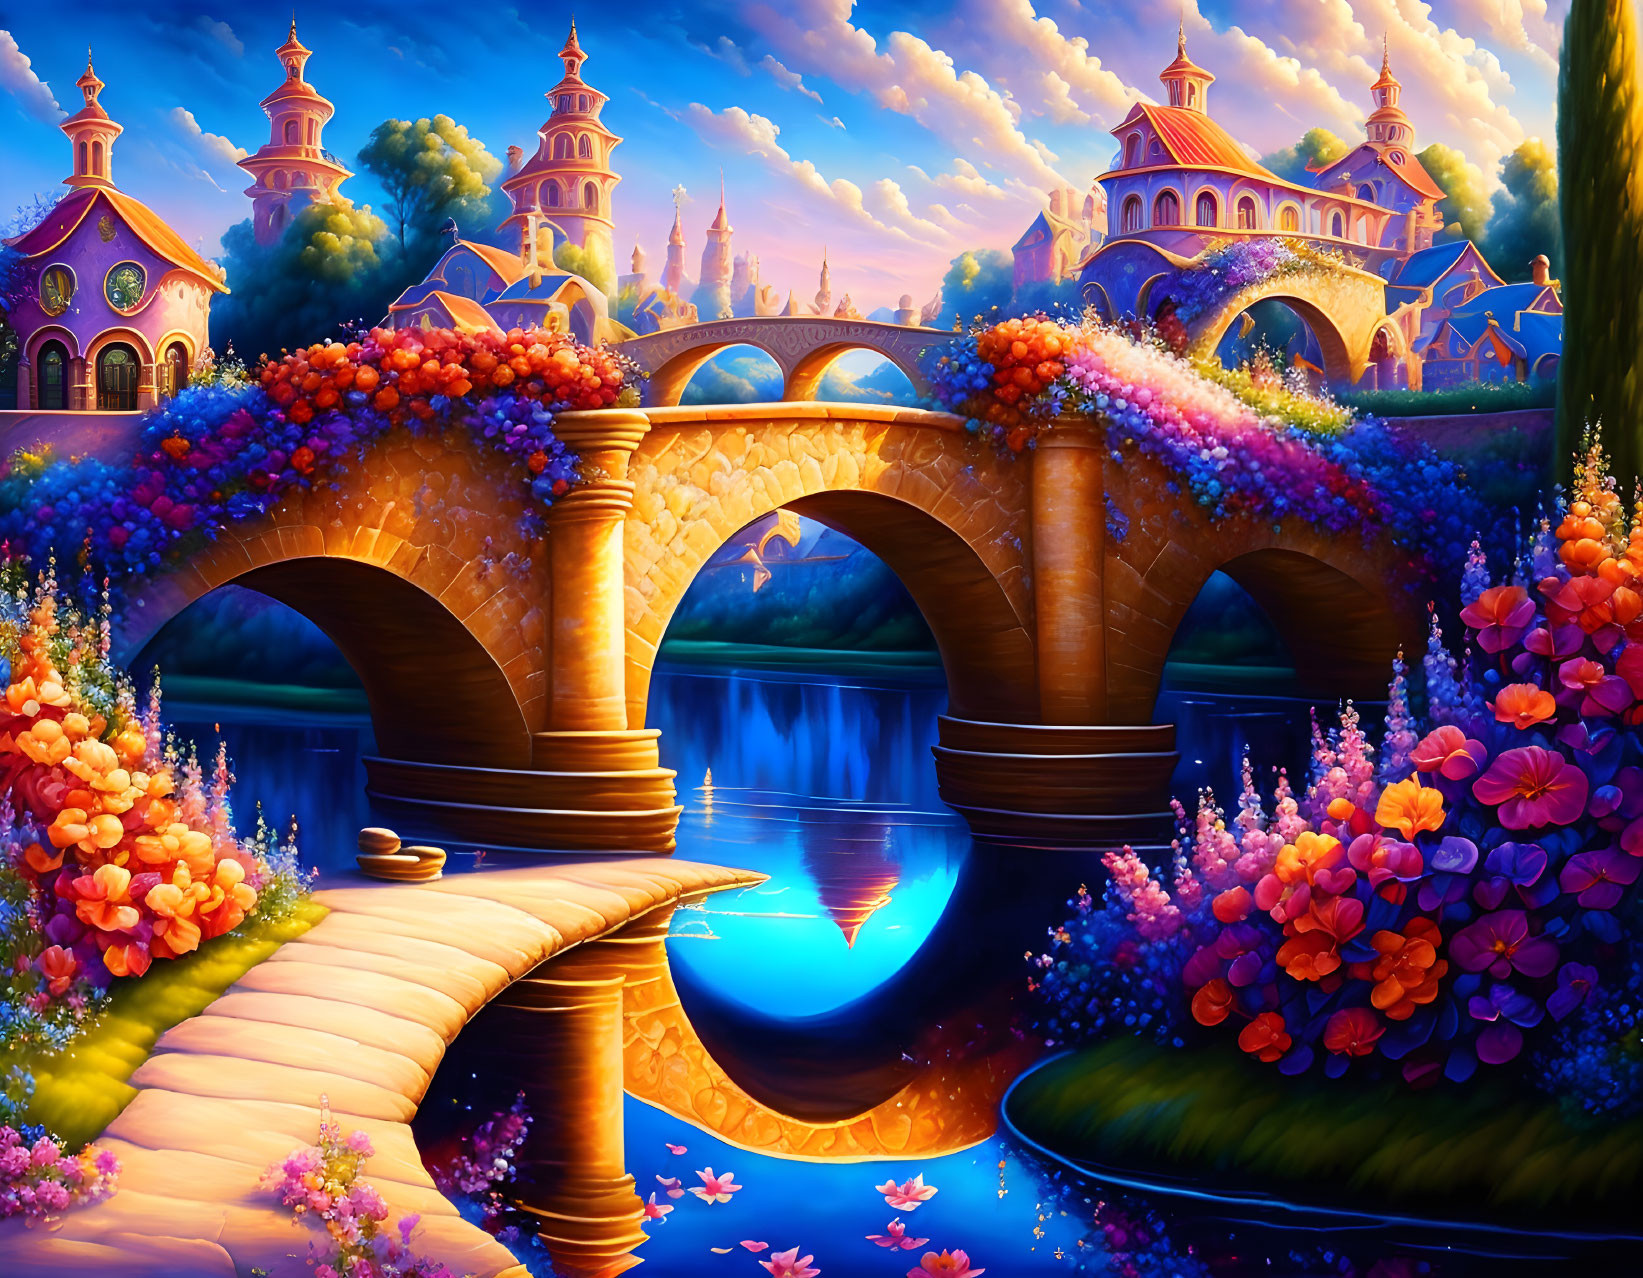 Fantasy landscape with stone bridge, river, flowers, and whimsical buildings at dusk